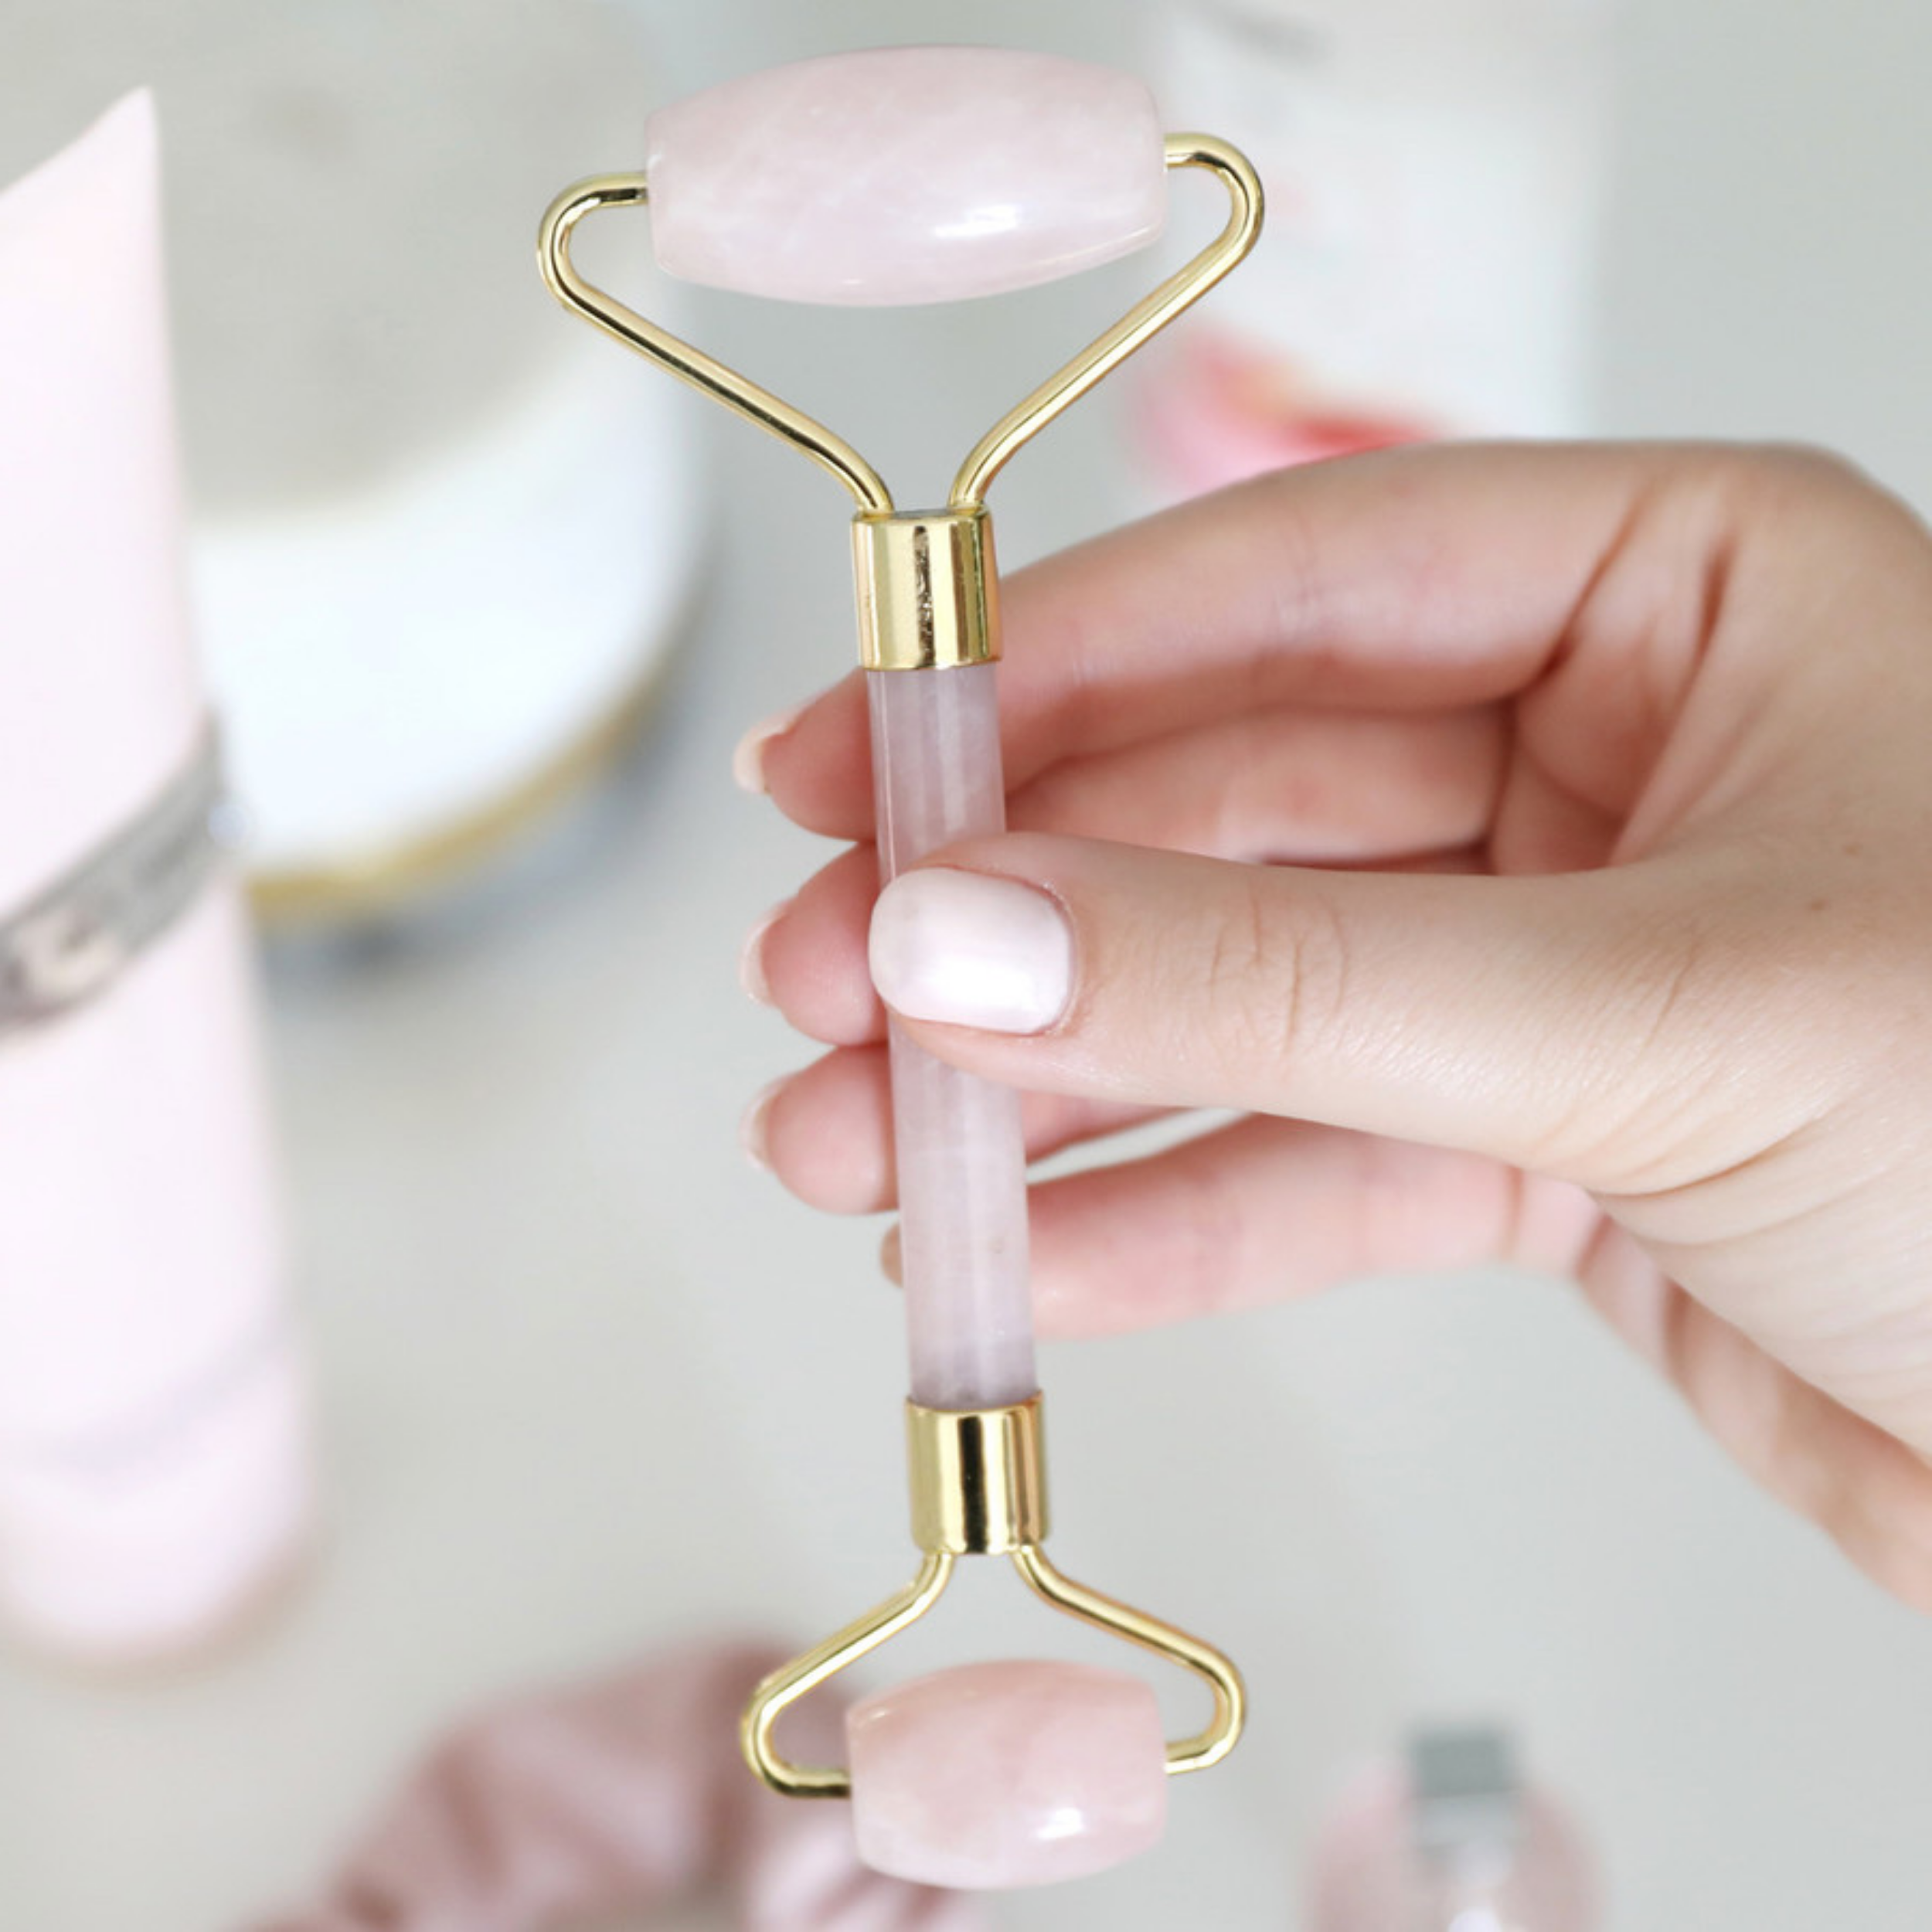 The Rose Quartz De-Puffing Face Roller With Certificate